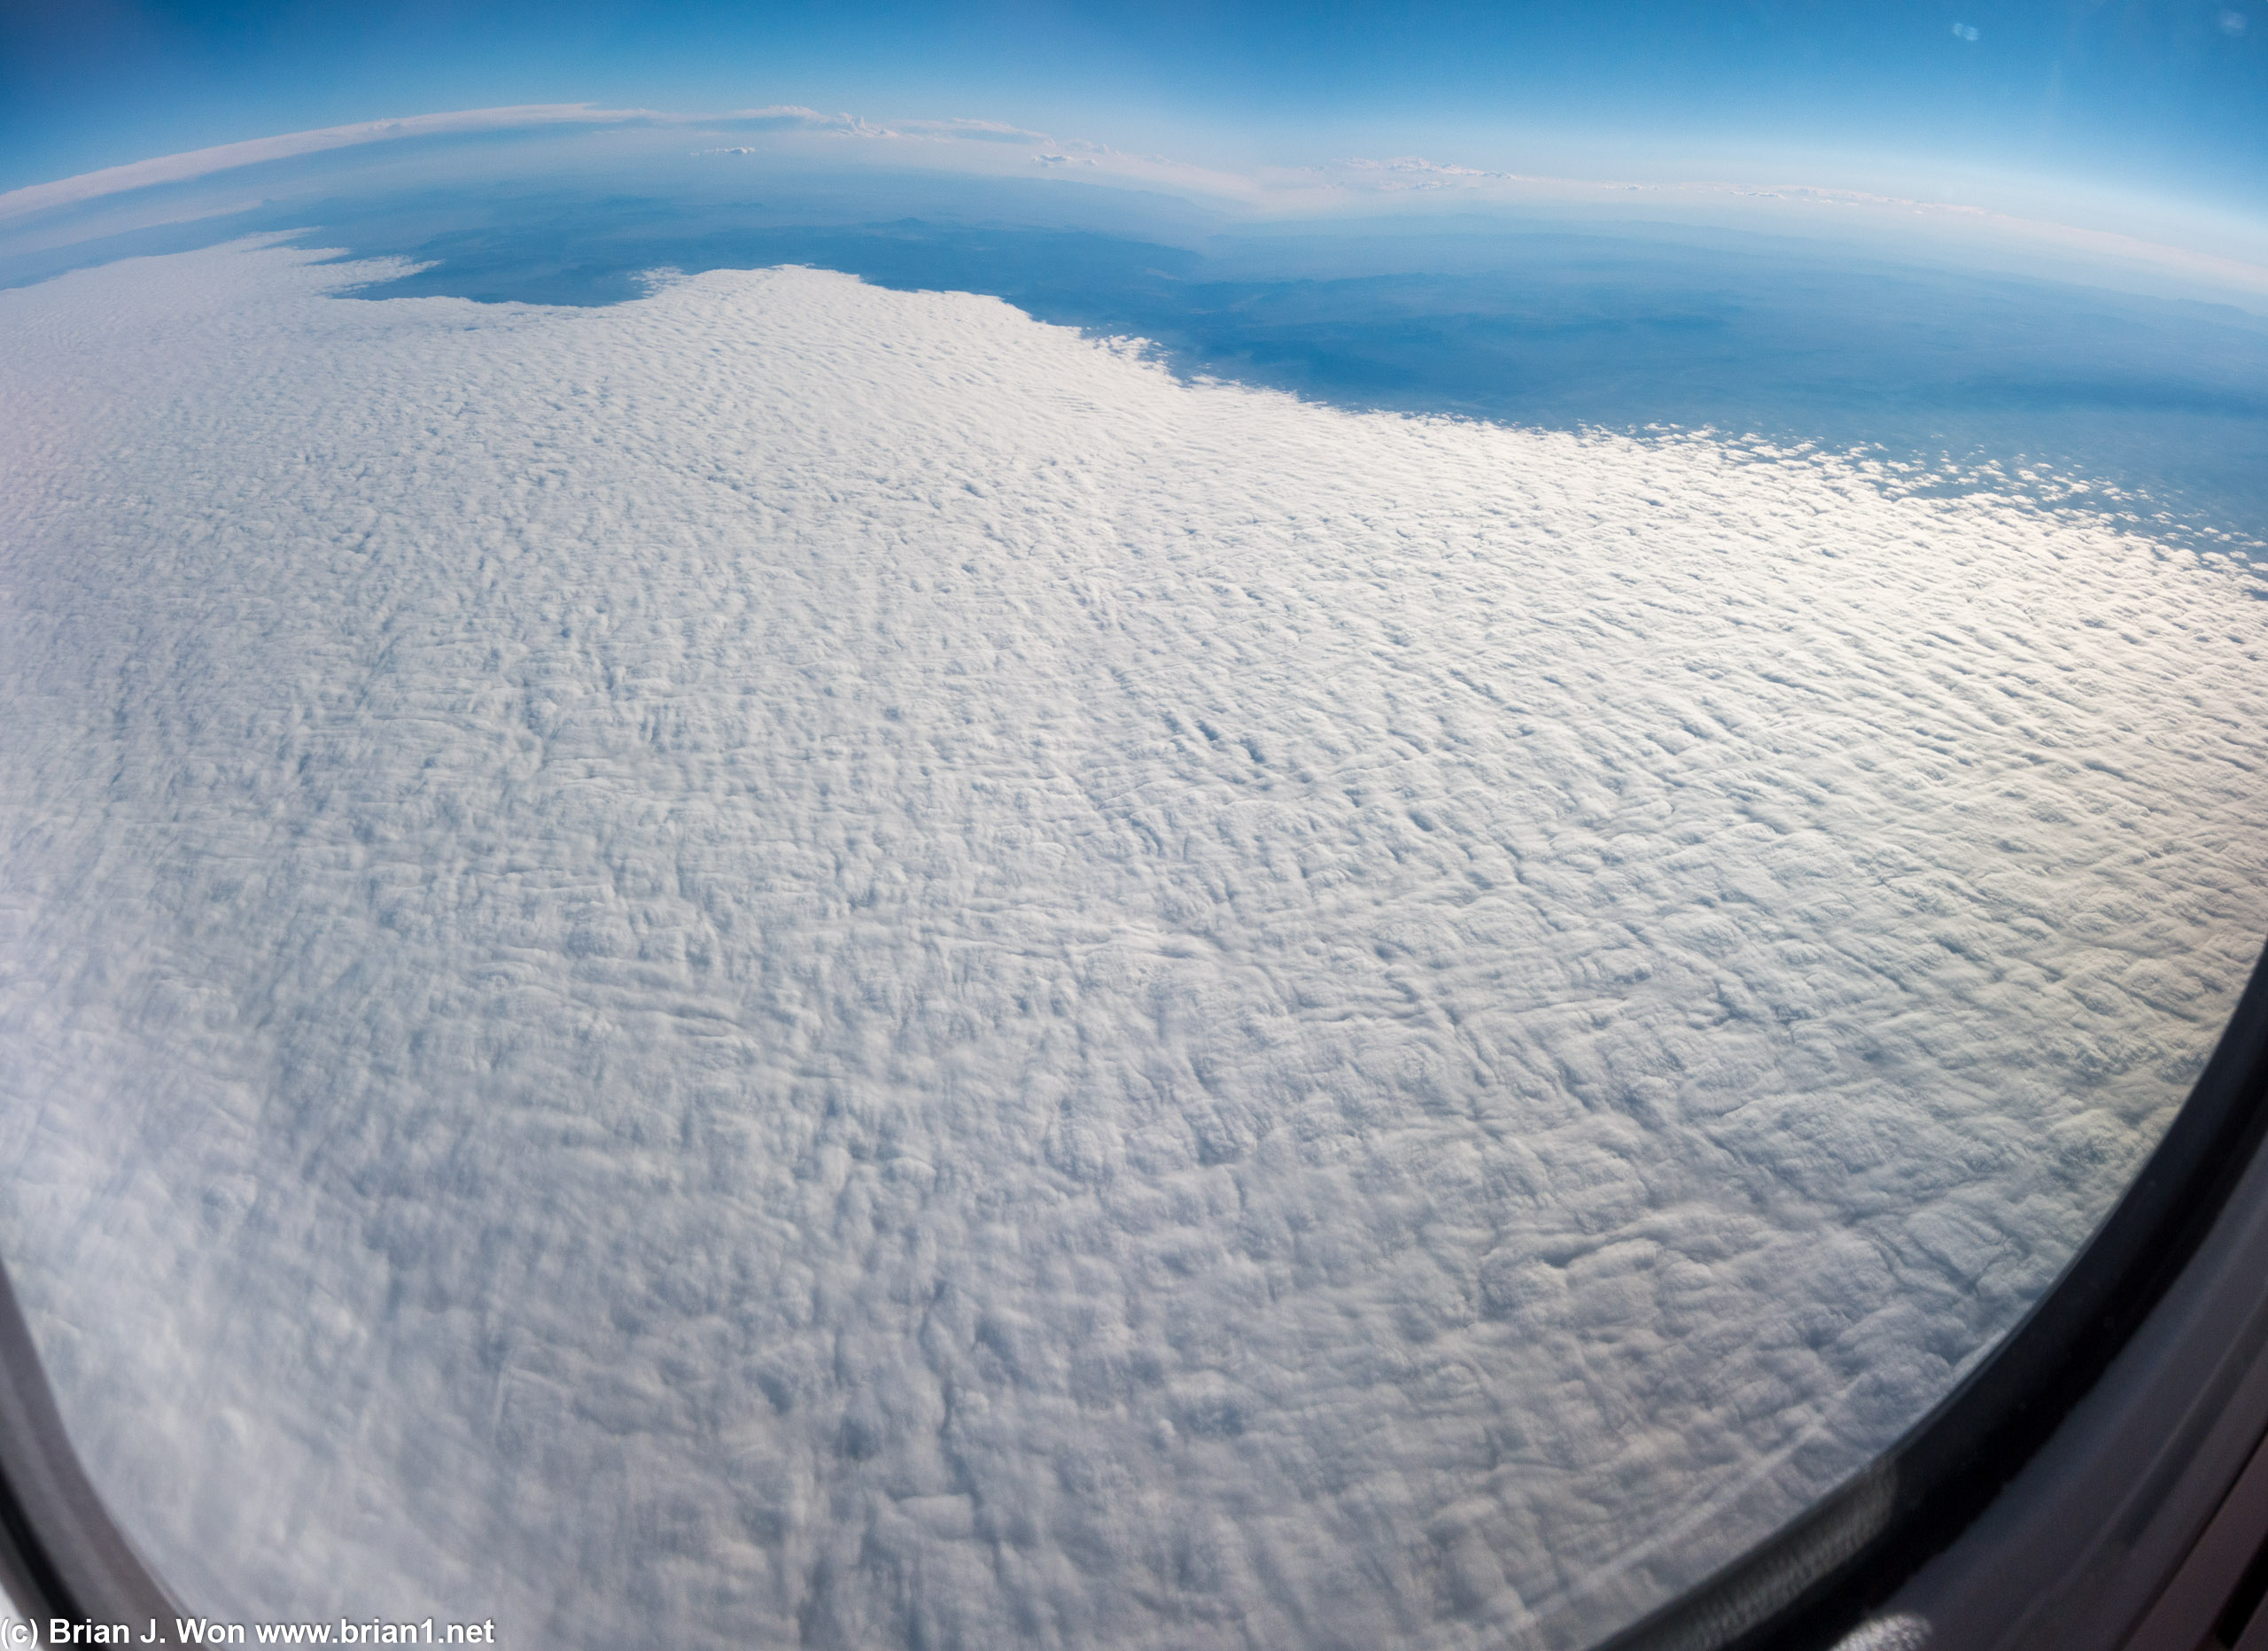 Almost 90 minutes after take-off, the clouds are finally starting to lift.